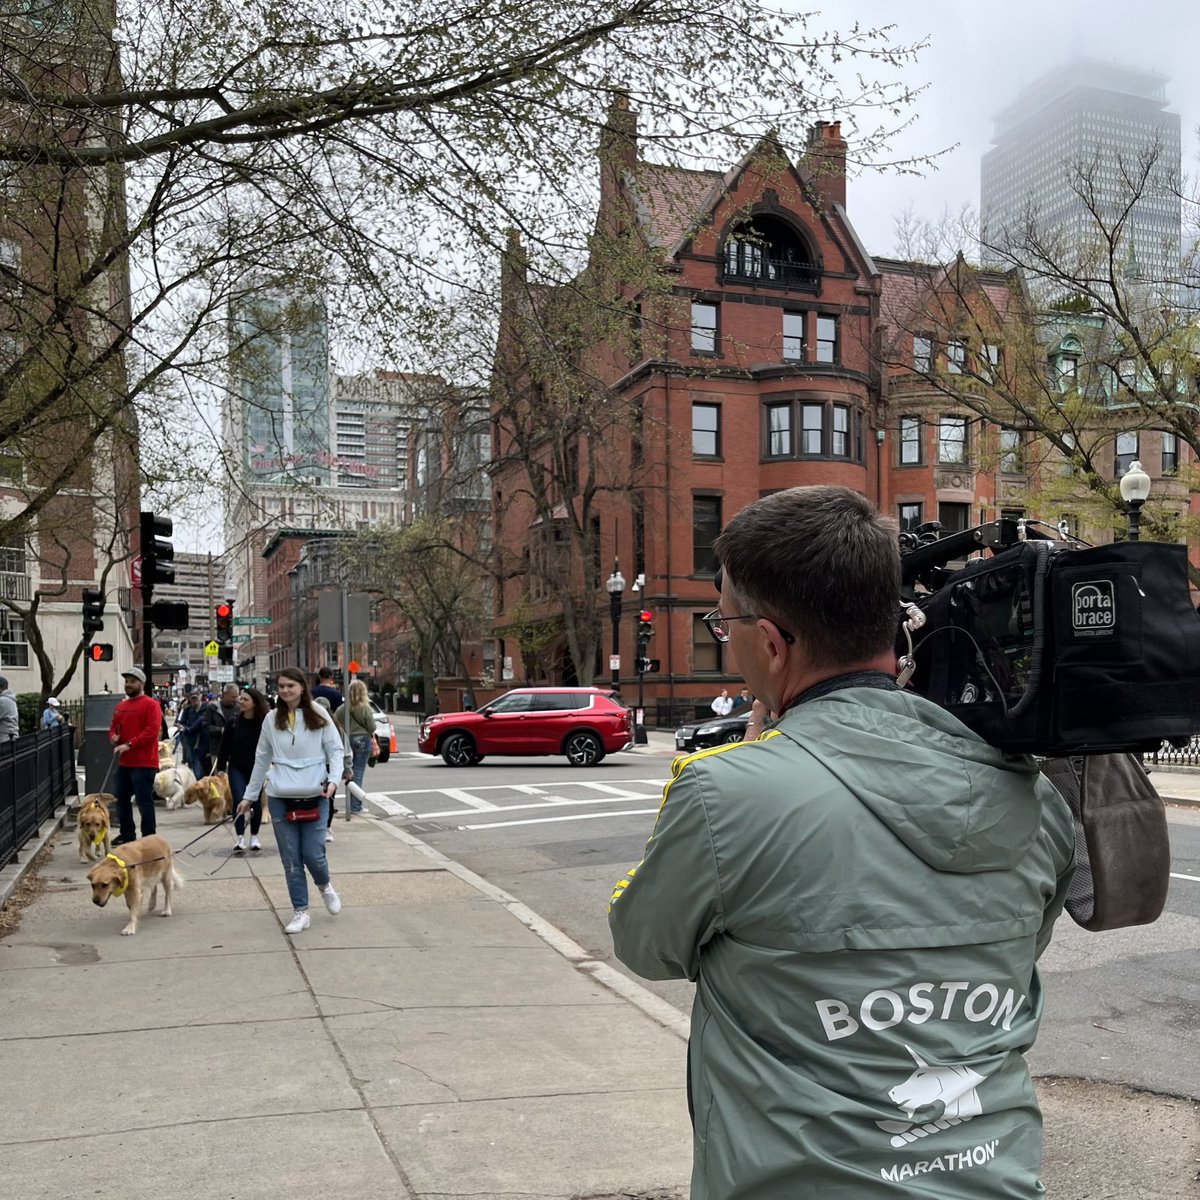 Over 100 golden retrievers and their owners are walking a mile this morning in honor of Spencer, the official #BostonMarathon dog who died earlier this year.